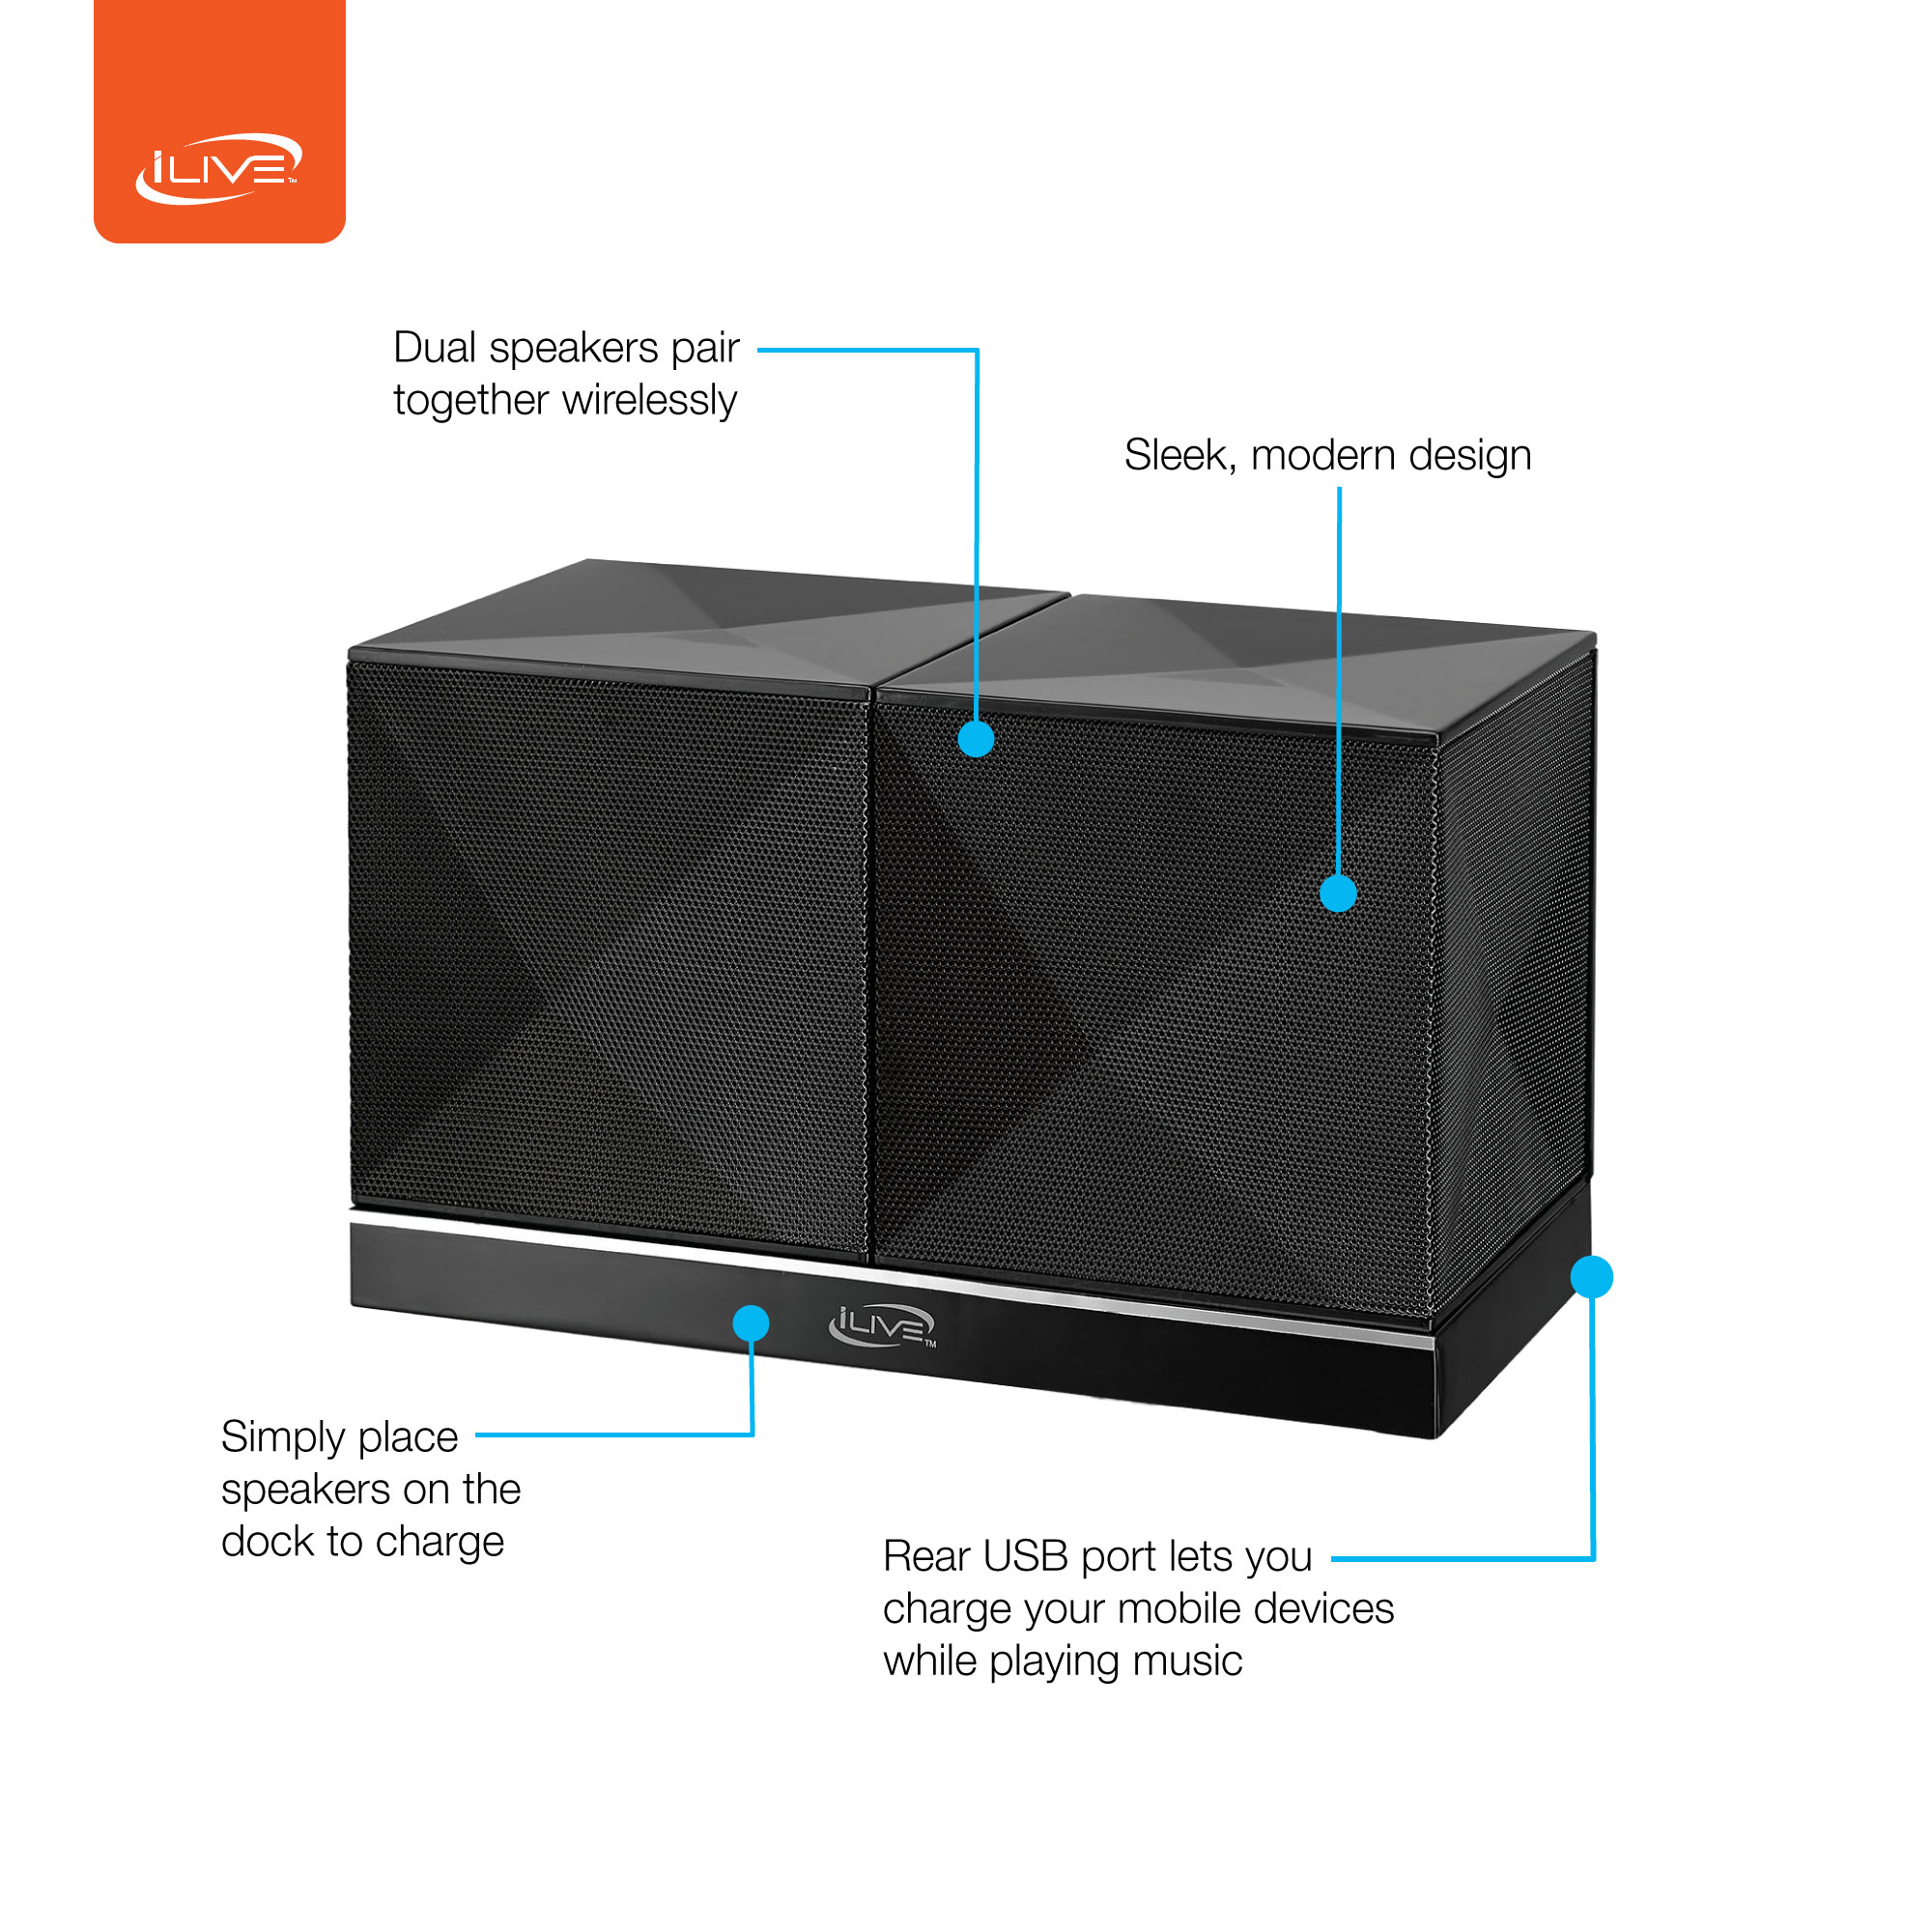 iLive v2.1 Bluetooth Wireless Speakers with Charging Station, ISB614B, Black - image 2 of 6